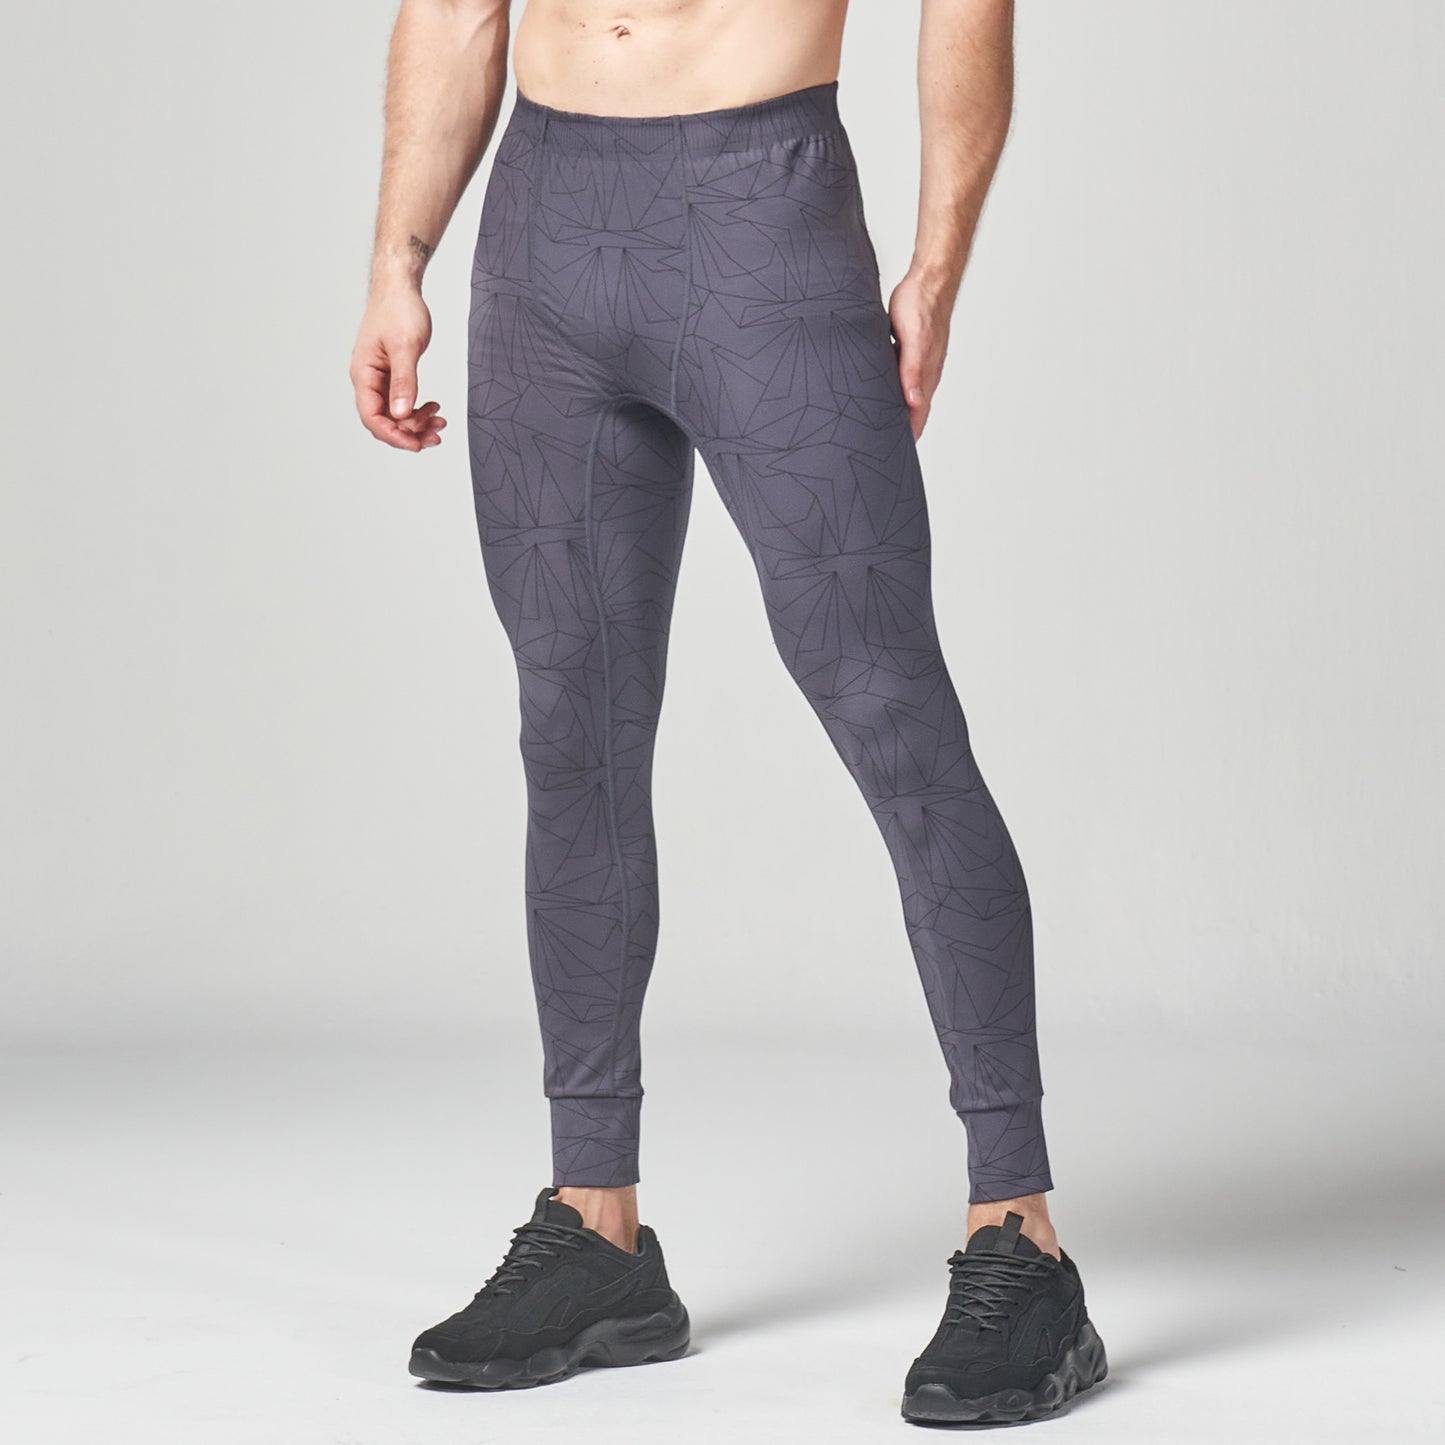 squatwolf-gym-wear-lab360-printed-impact-tights-black-workout-tights-for-men